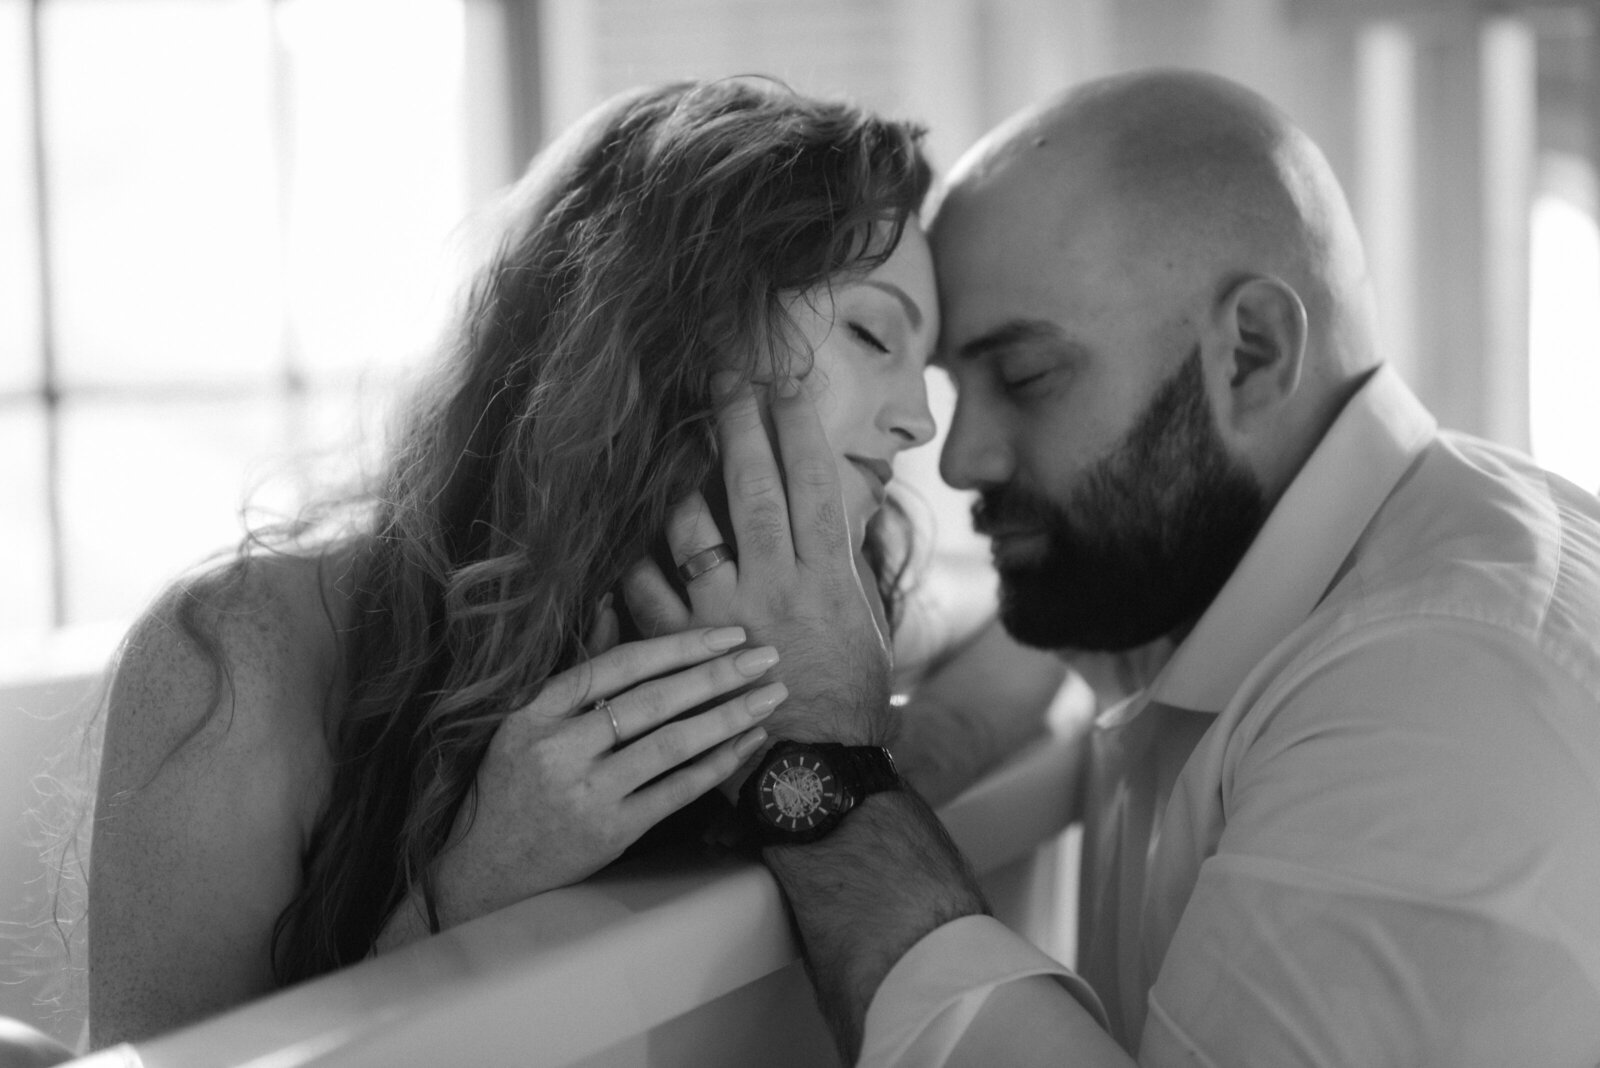 groom embracing the bride and touching her face black and white image. Prepping for their elopement